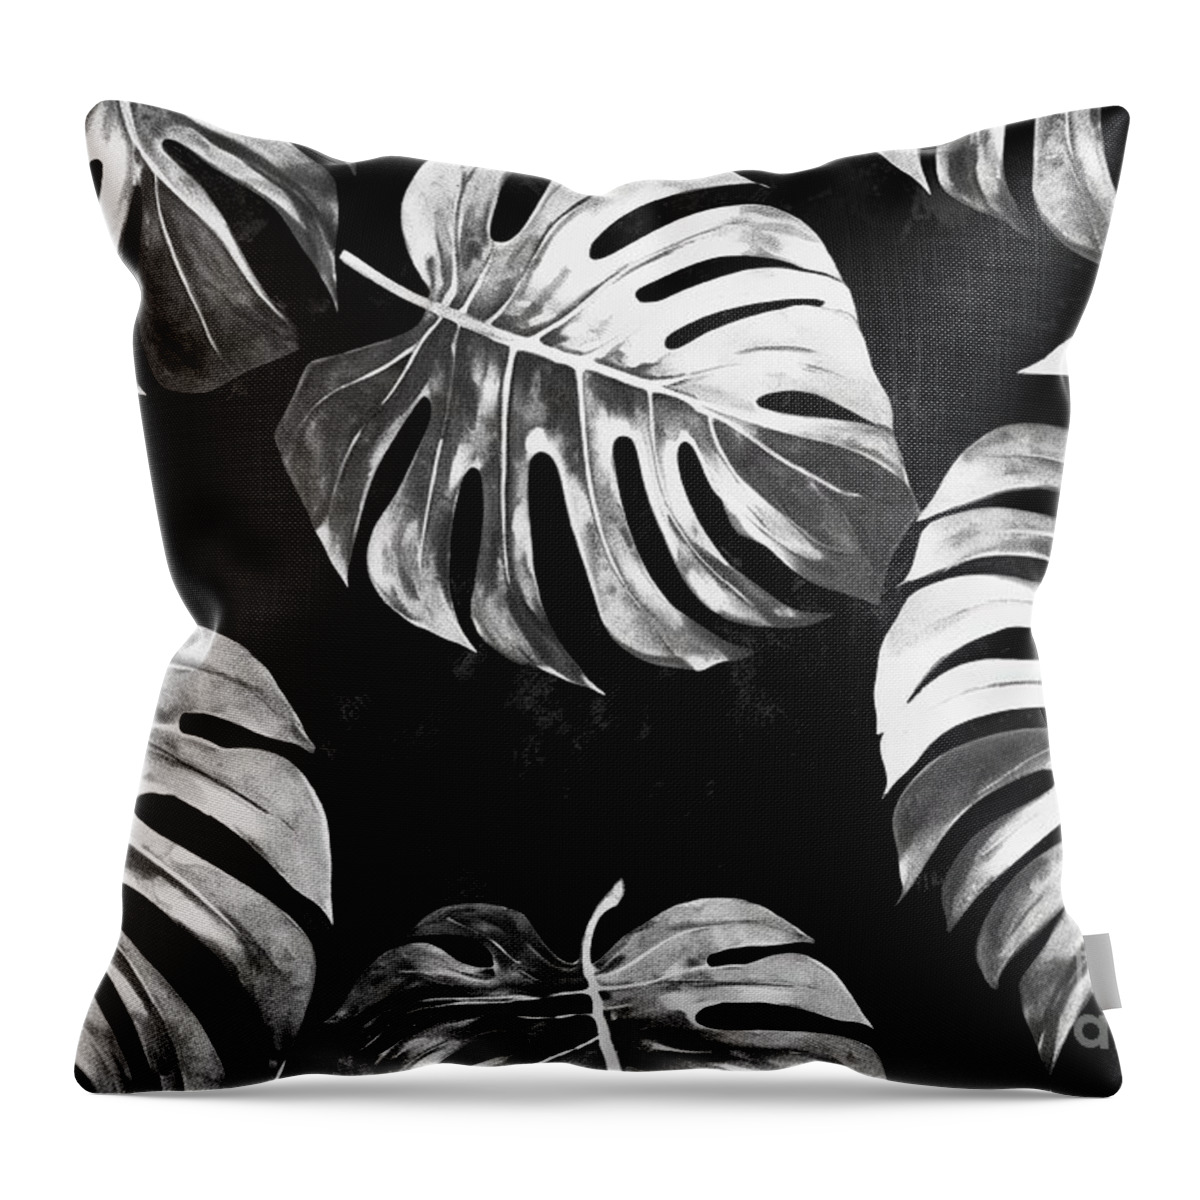 Seamless Throw Pillow featuring the painting Seamless Painted Monstera Jungle Leaves Black And White Artistic Acrylic Paint Texture Background Tileable Creative Grunge Monochrome Hand Drawn Fall Foliage Motif Wallpaper Surface Pattern Design by N Akkash